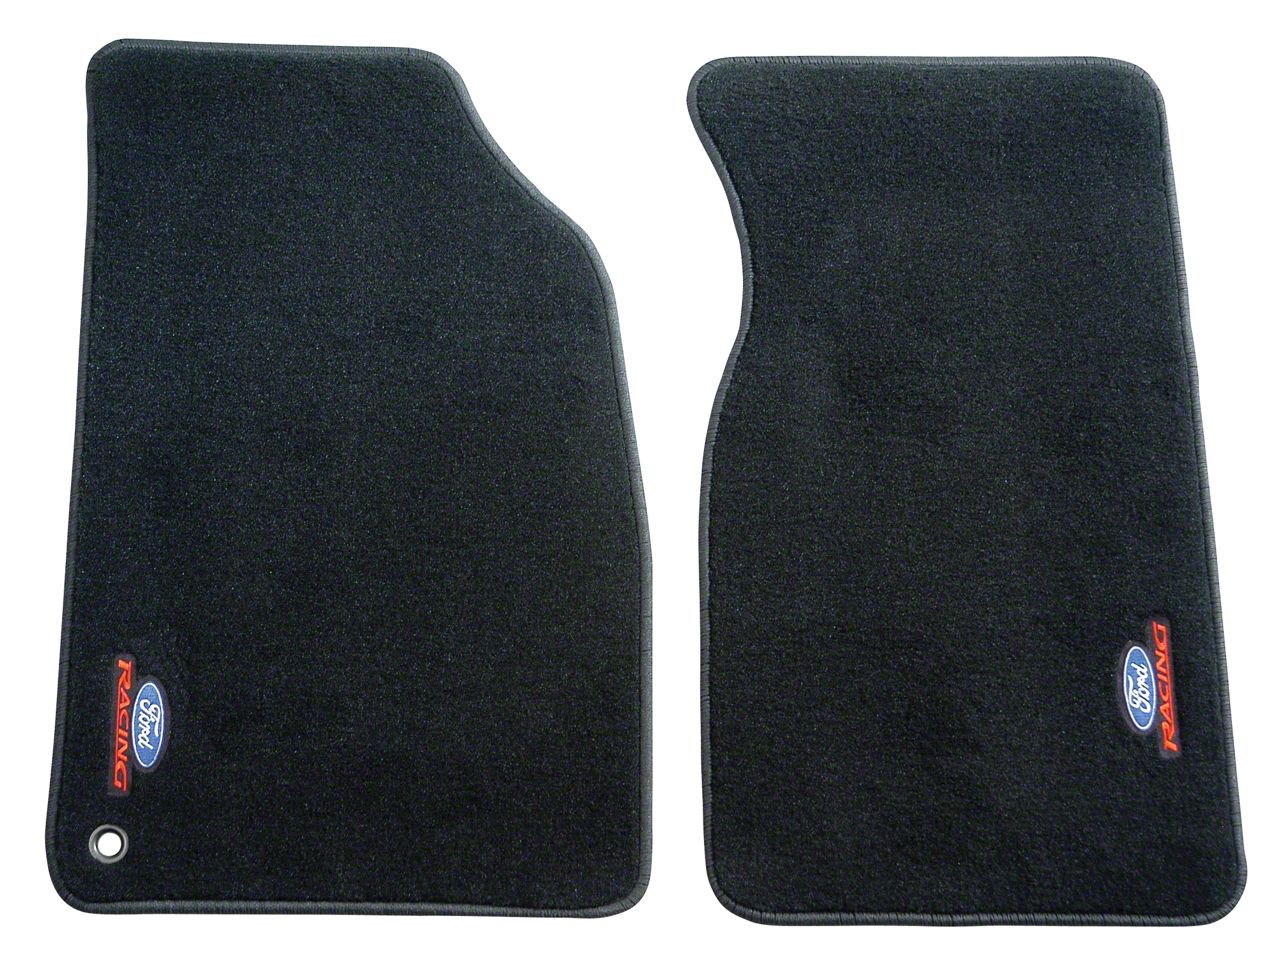 Ford Performance Mustang Black Floor Mats M-13086-B (94-04 All) - Free ...